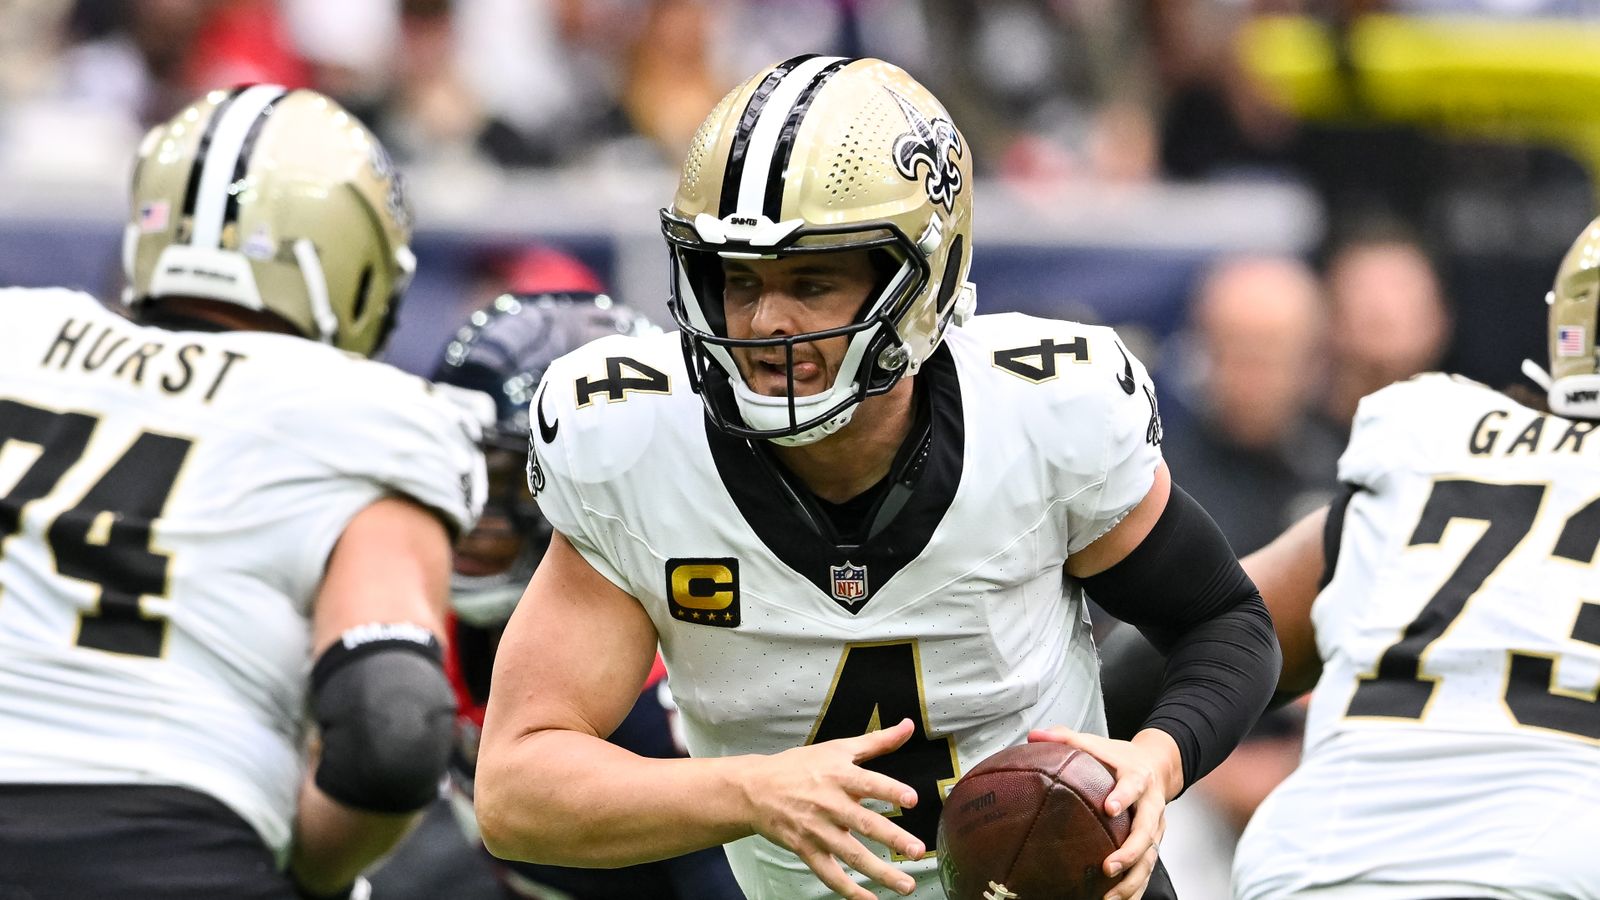 QB Derek Carr sums up Saints passing attack with one word: 'Unacceptable'